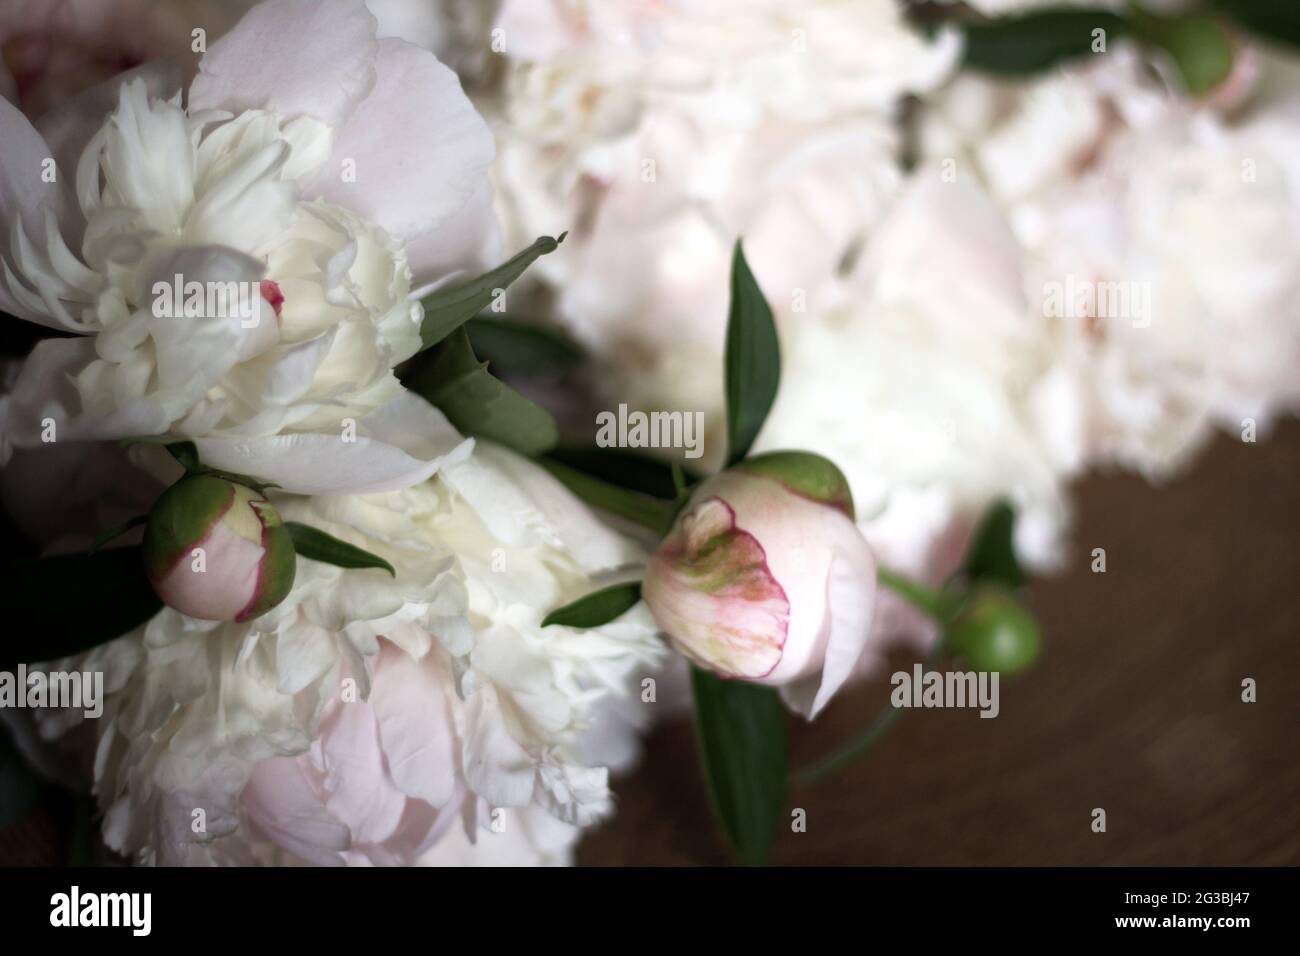 Close up of Beautiful Bouquet of Peonies Flowers. Peony Flower for Wedding Decor. Stock Photo